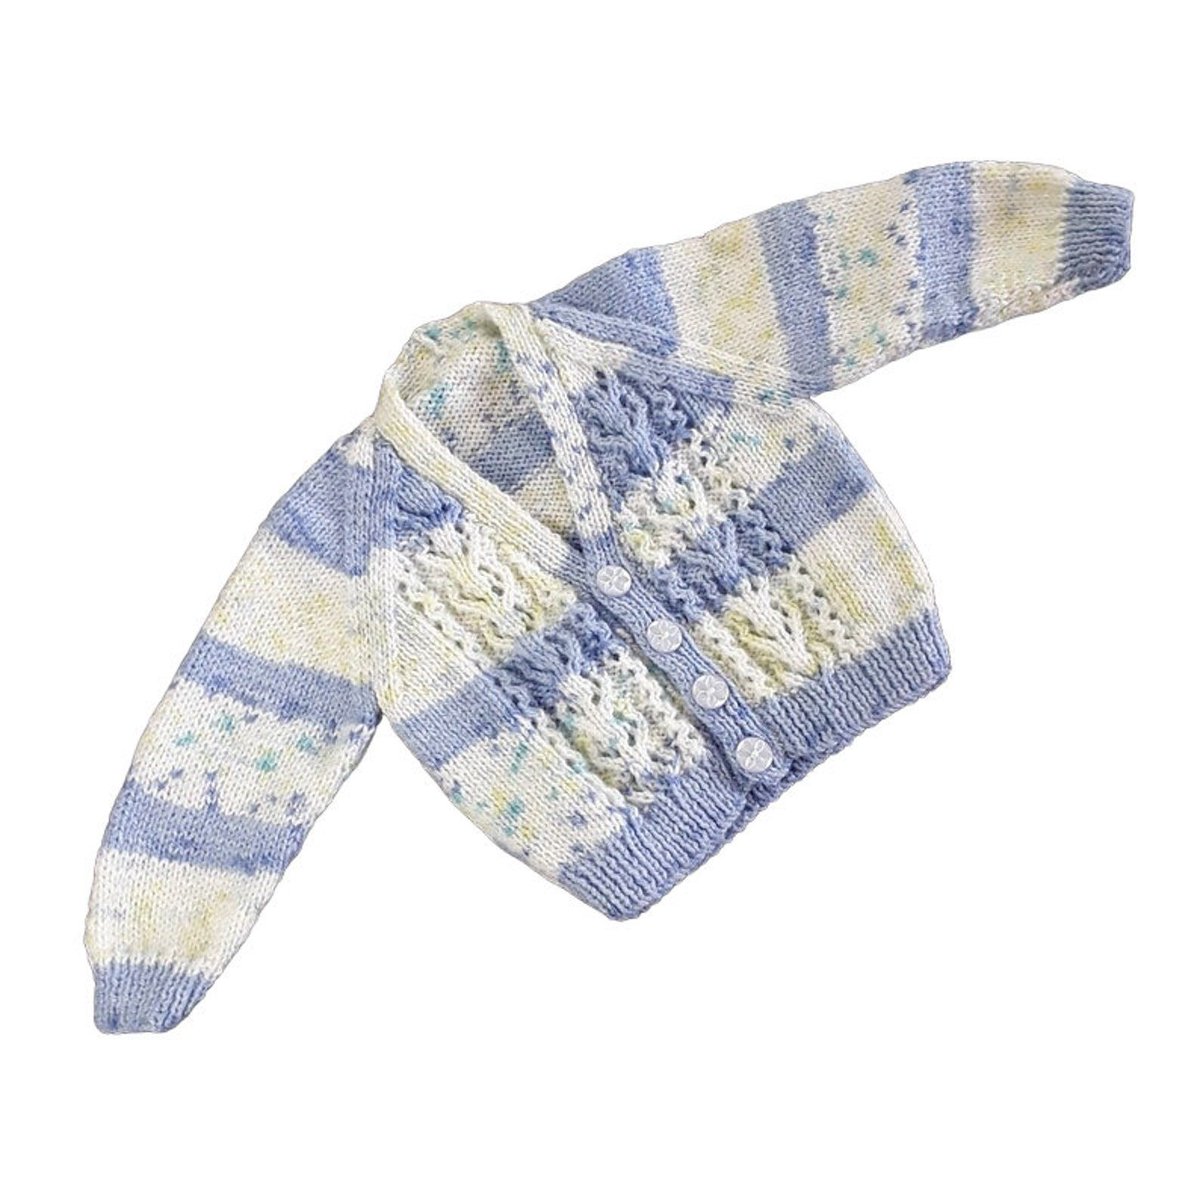 Wrap your little one in this cozy hand-knitted cardigan in blue and cream! Ideal for 6-12 months old. Available now on #Etsy! knittingtopia.etsy.com/listing/171282… #knittingtopia #knittedbabyclothes #handknits #MHHSBD #craftbizparty